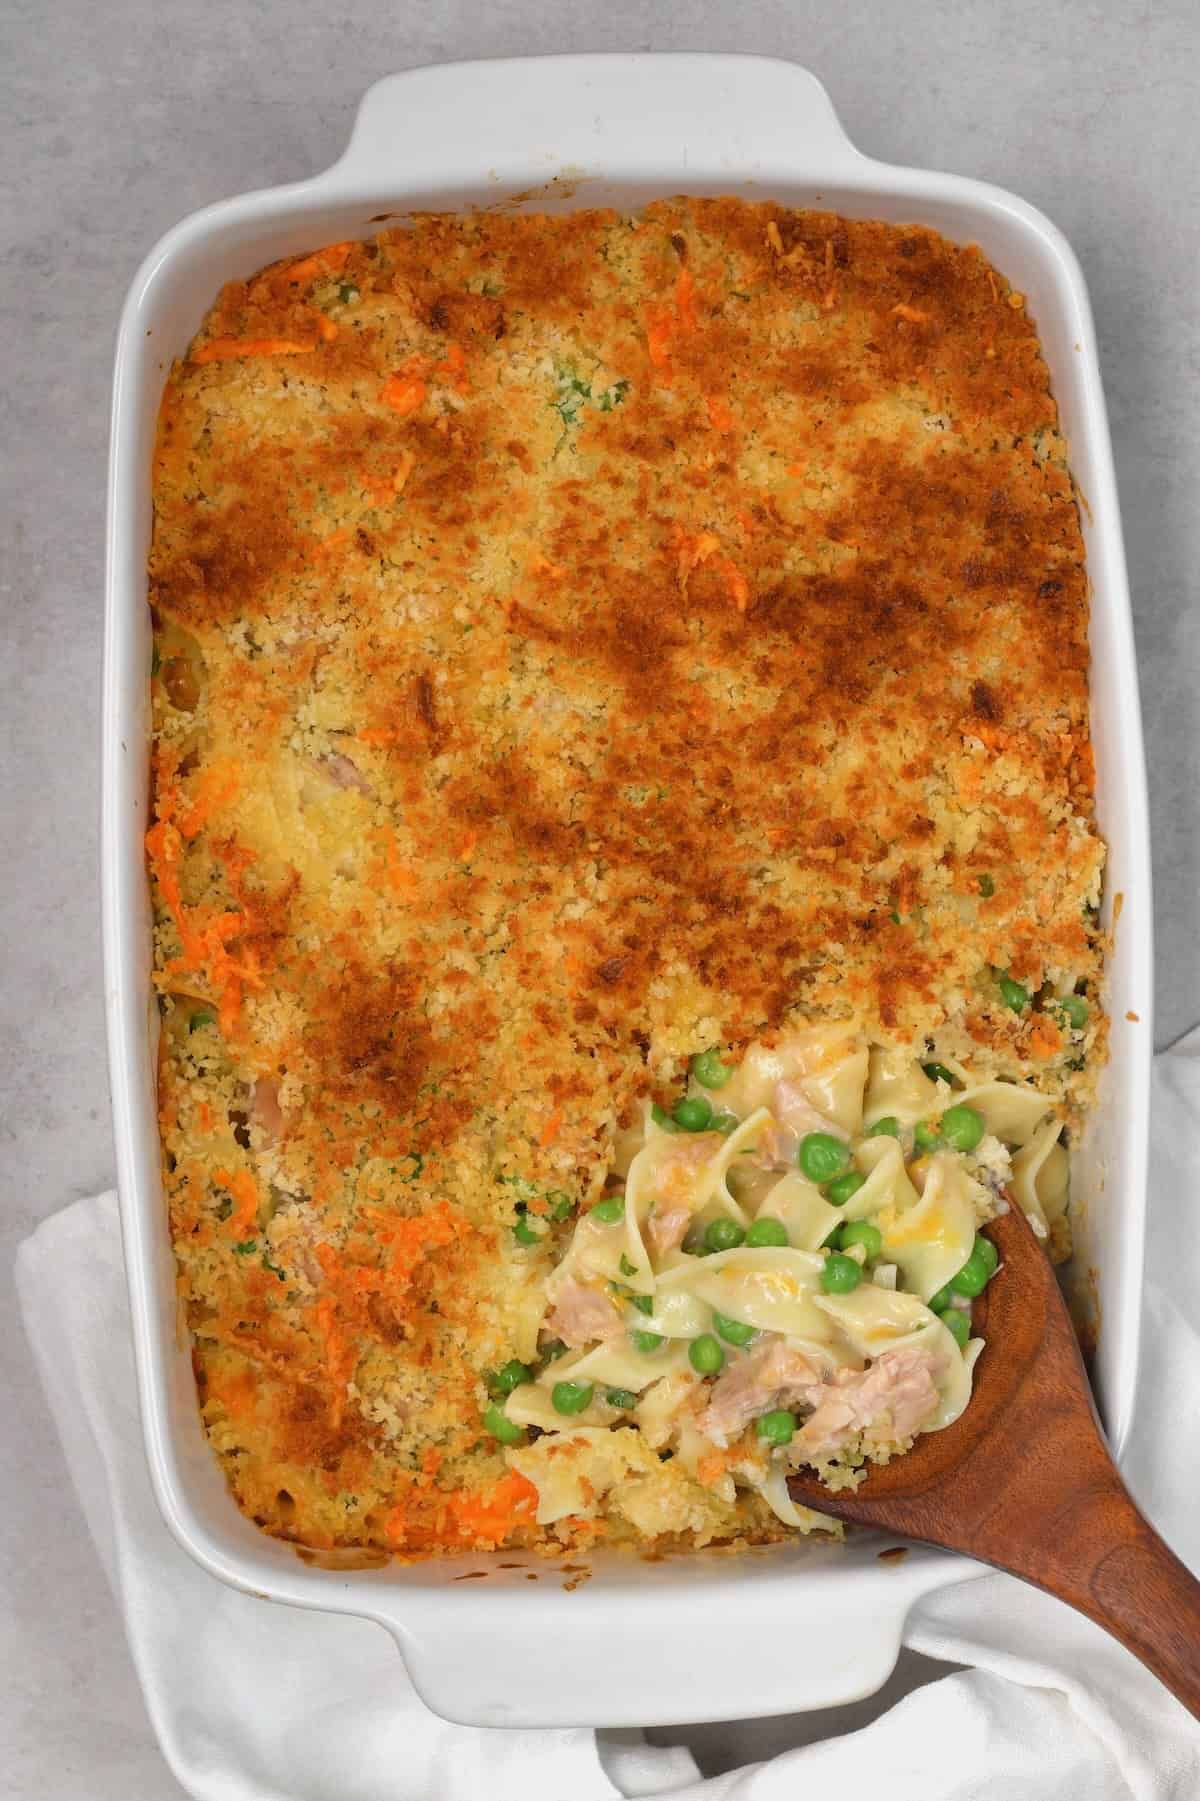 A serving spoon dipping in tuna casserole